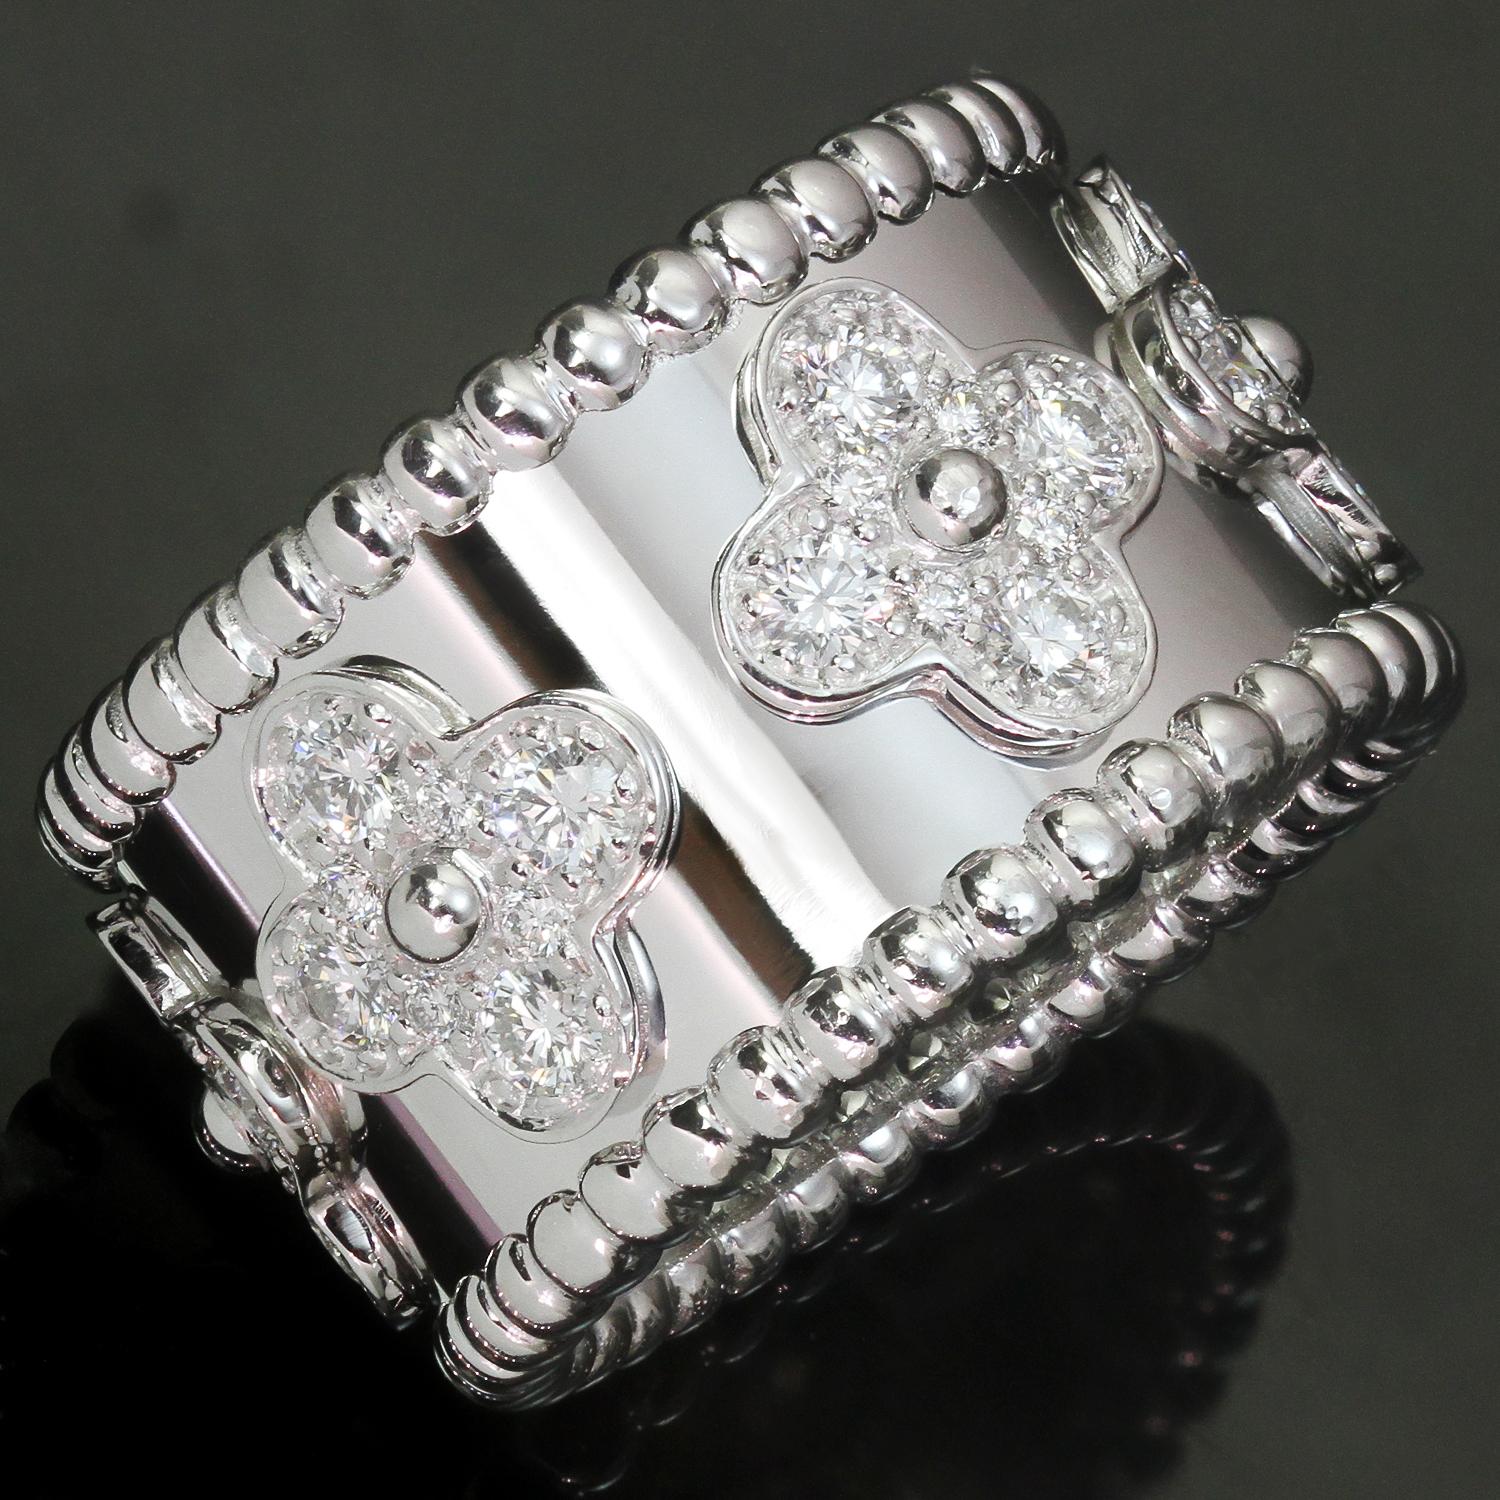 This gorgeous Van Cleef & Arpels band from elegant Perlée Clovers collection is crafted in 18k white gold and features a floral clover design set with round brilliant D-F VVS1-VVS2 diamonds weighing an estimated 0.71 carats. Made in France circa